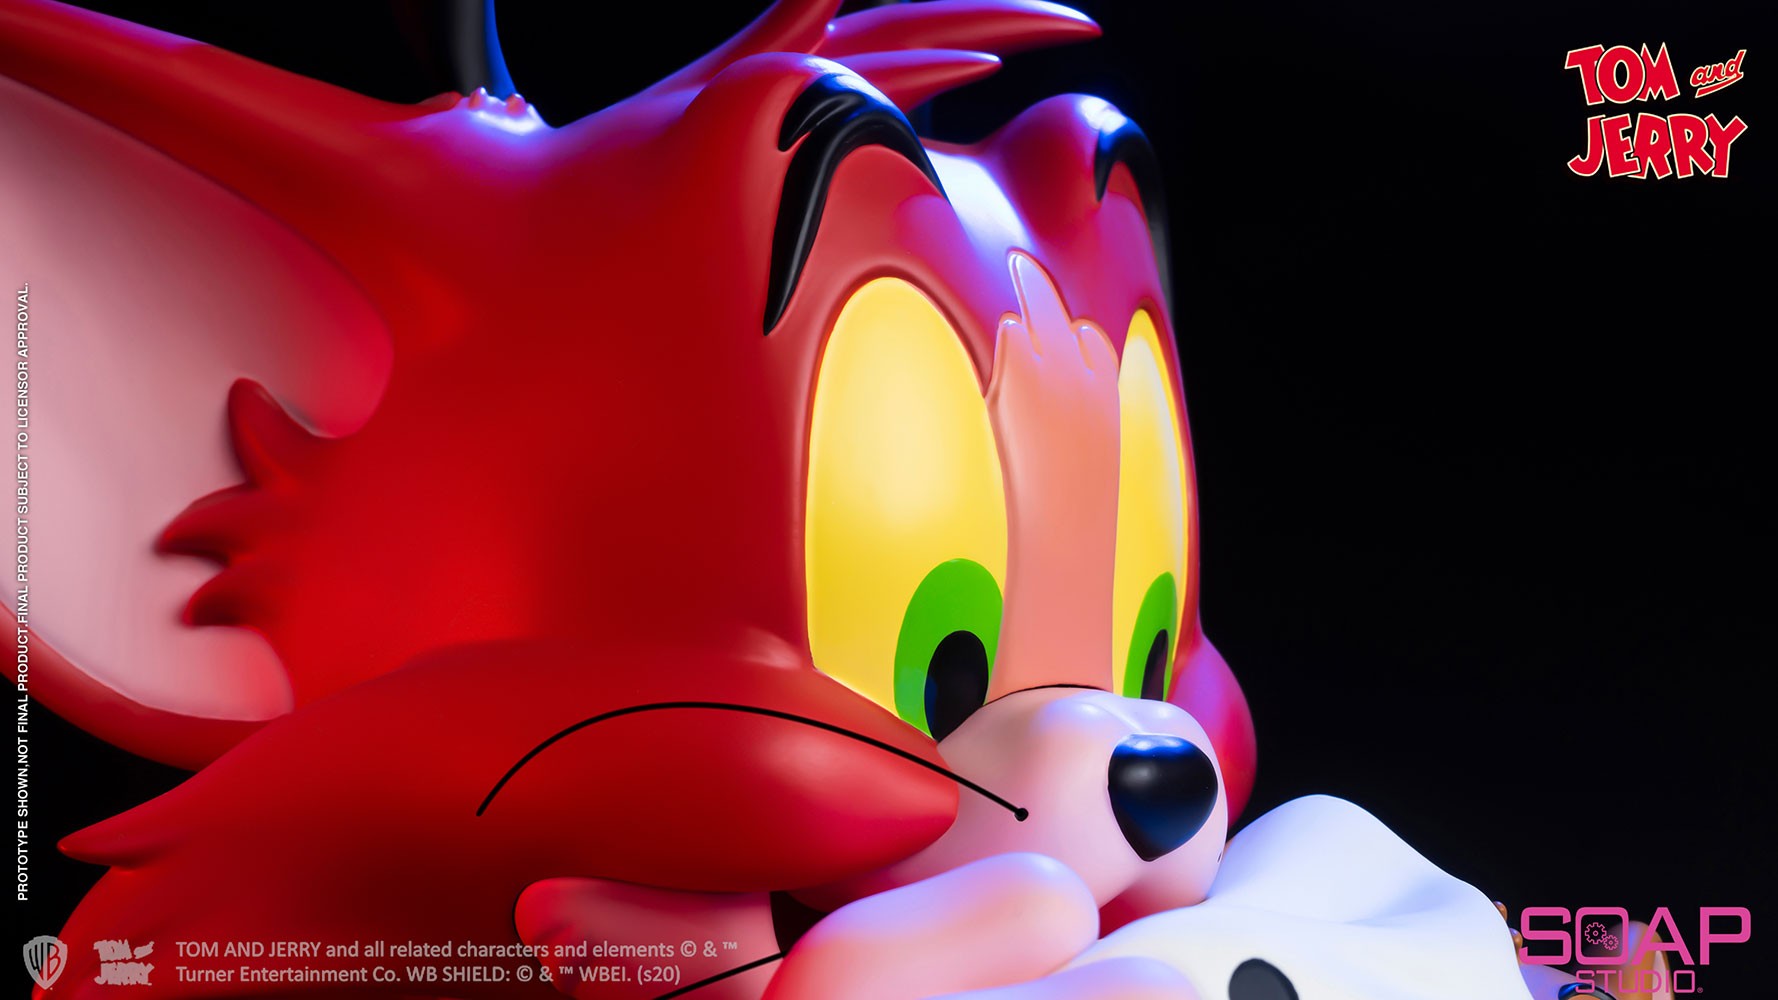 Tom and Jerry Devil Version Vinyl Bust by Soap Studio | Sideshow 